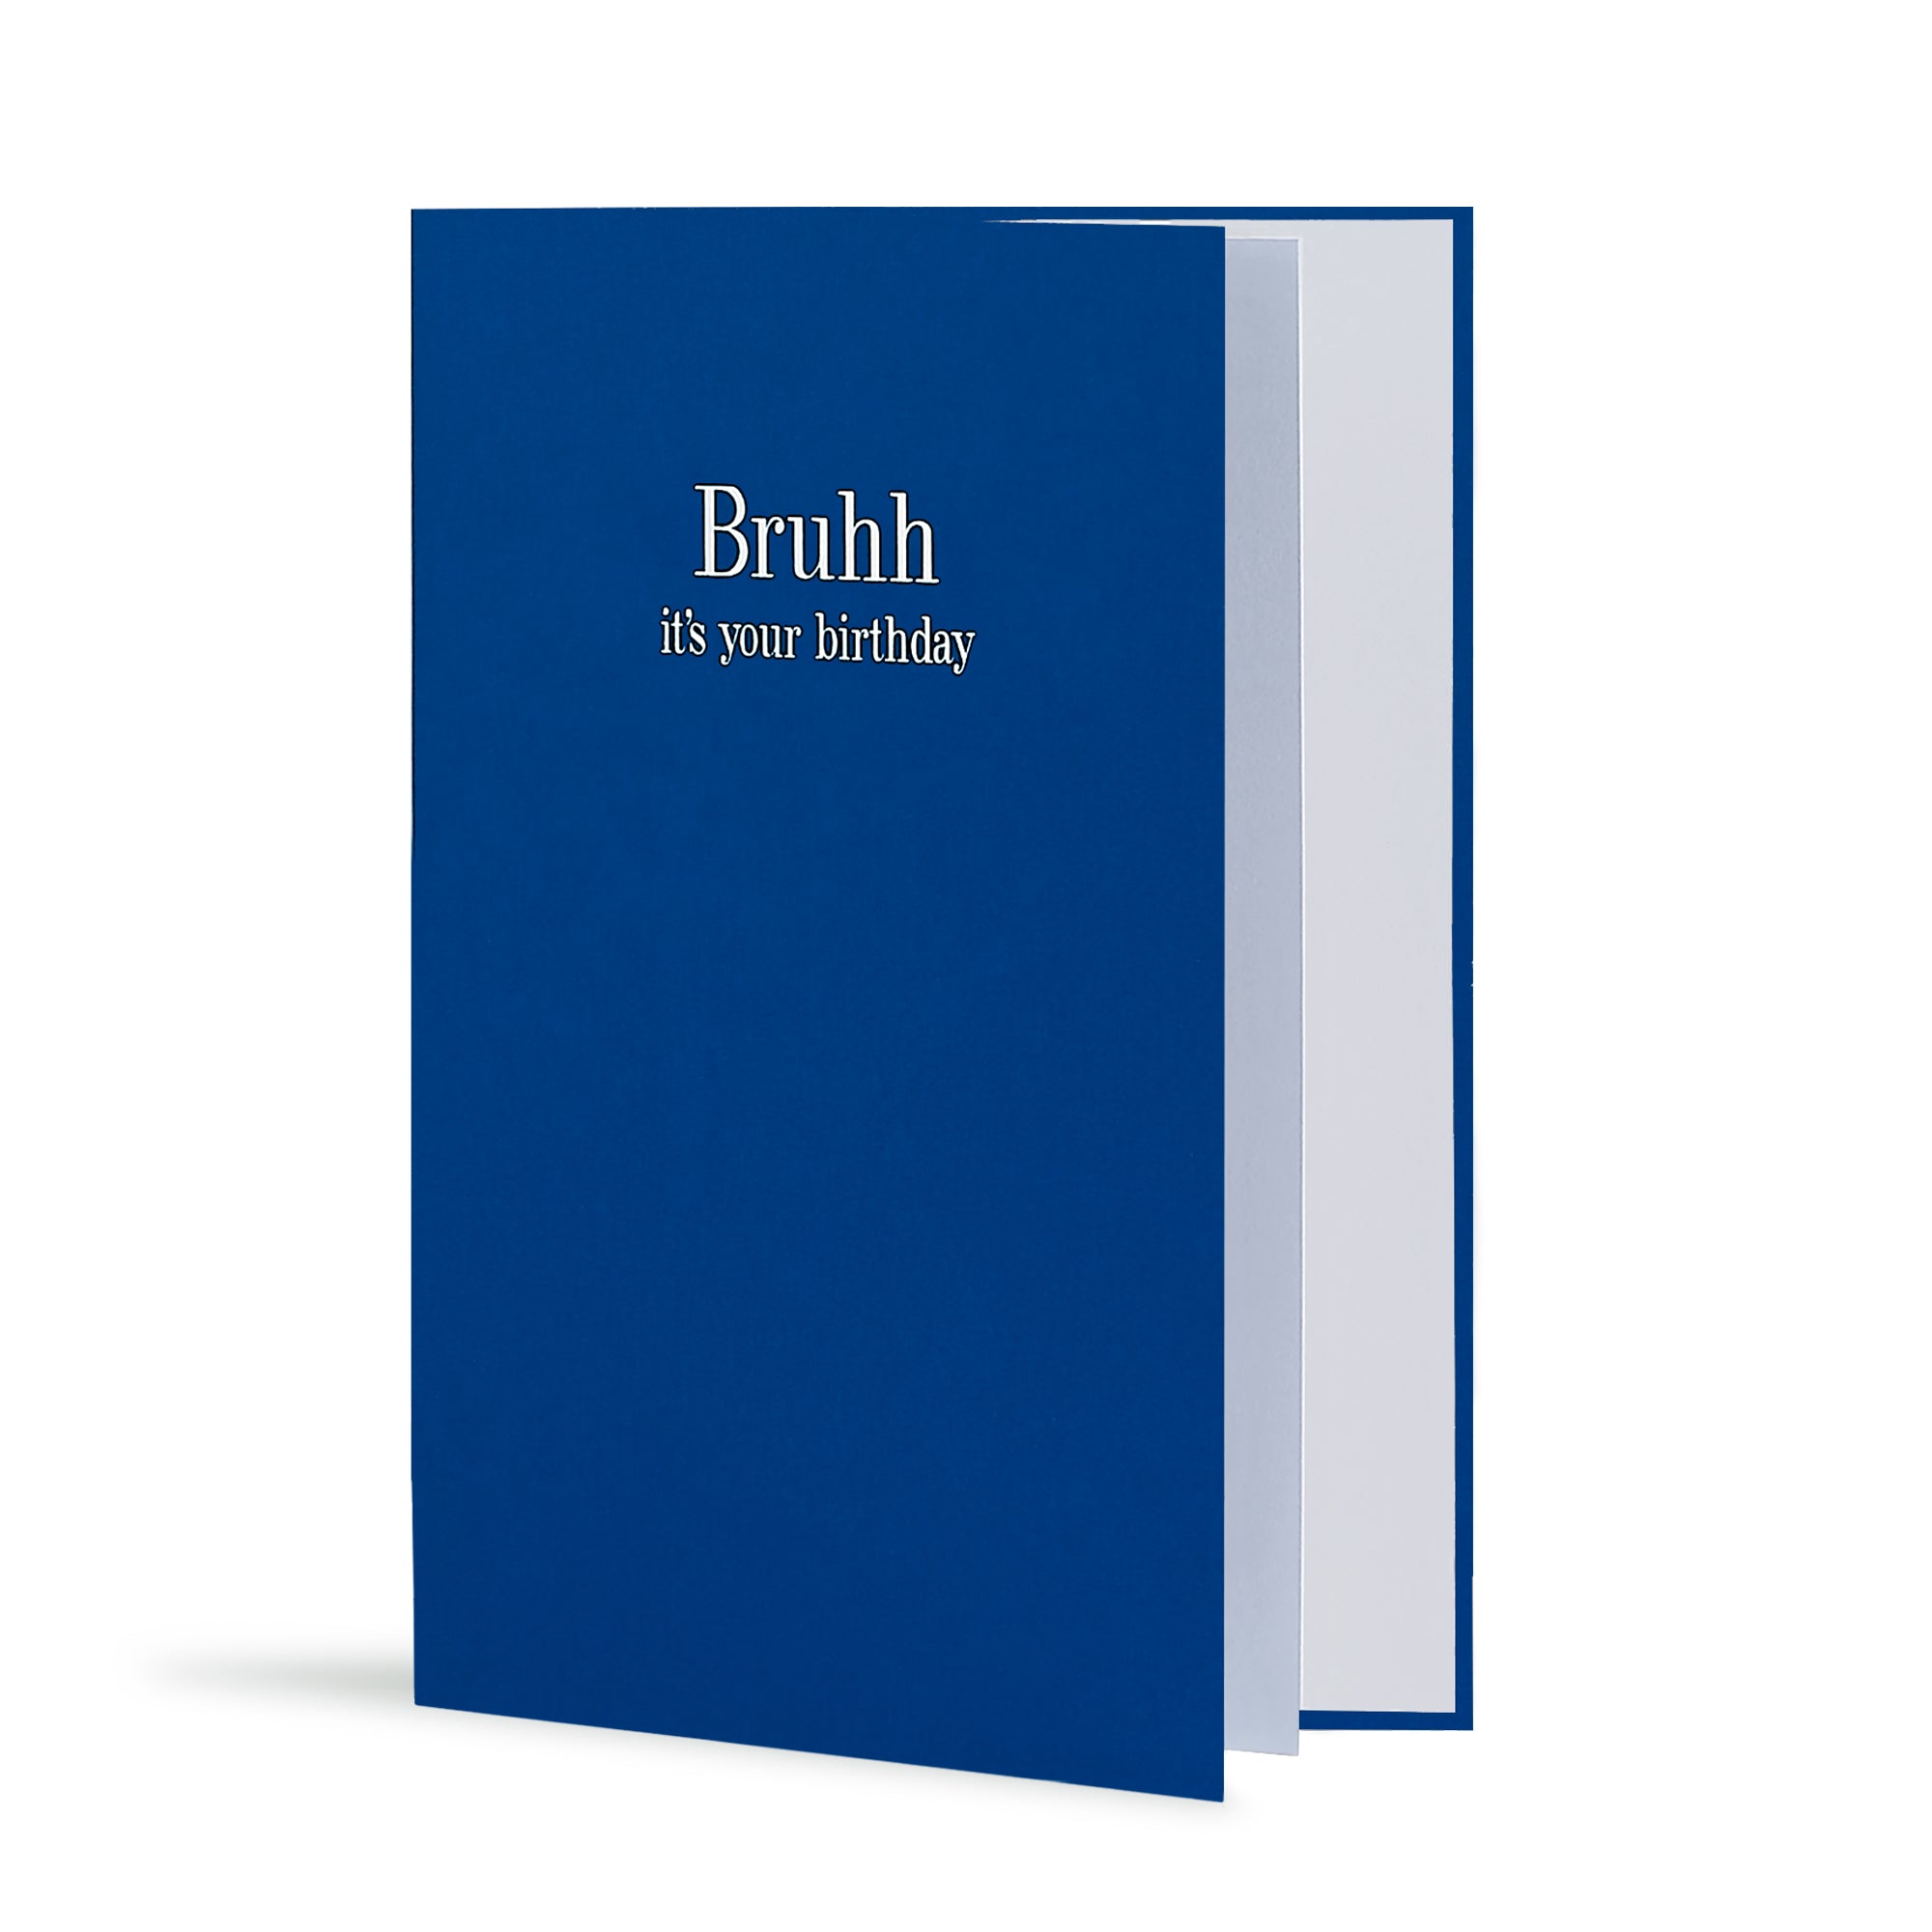 Bruhh It's Your Birthday Greeting Card in Royal Blue, Side